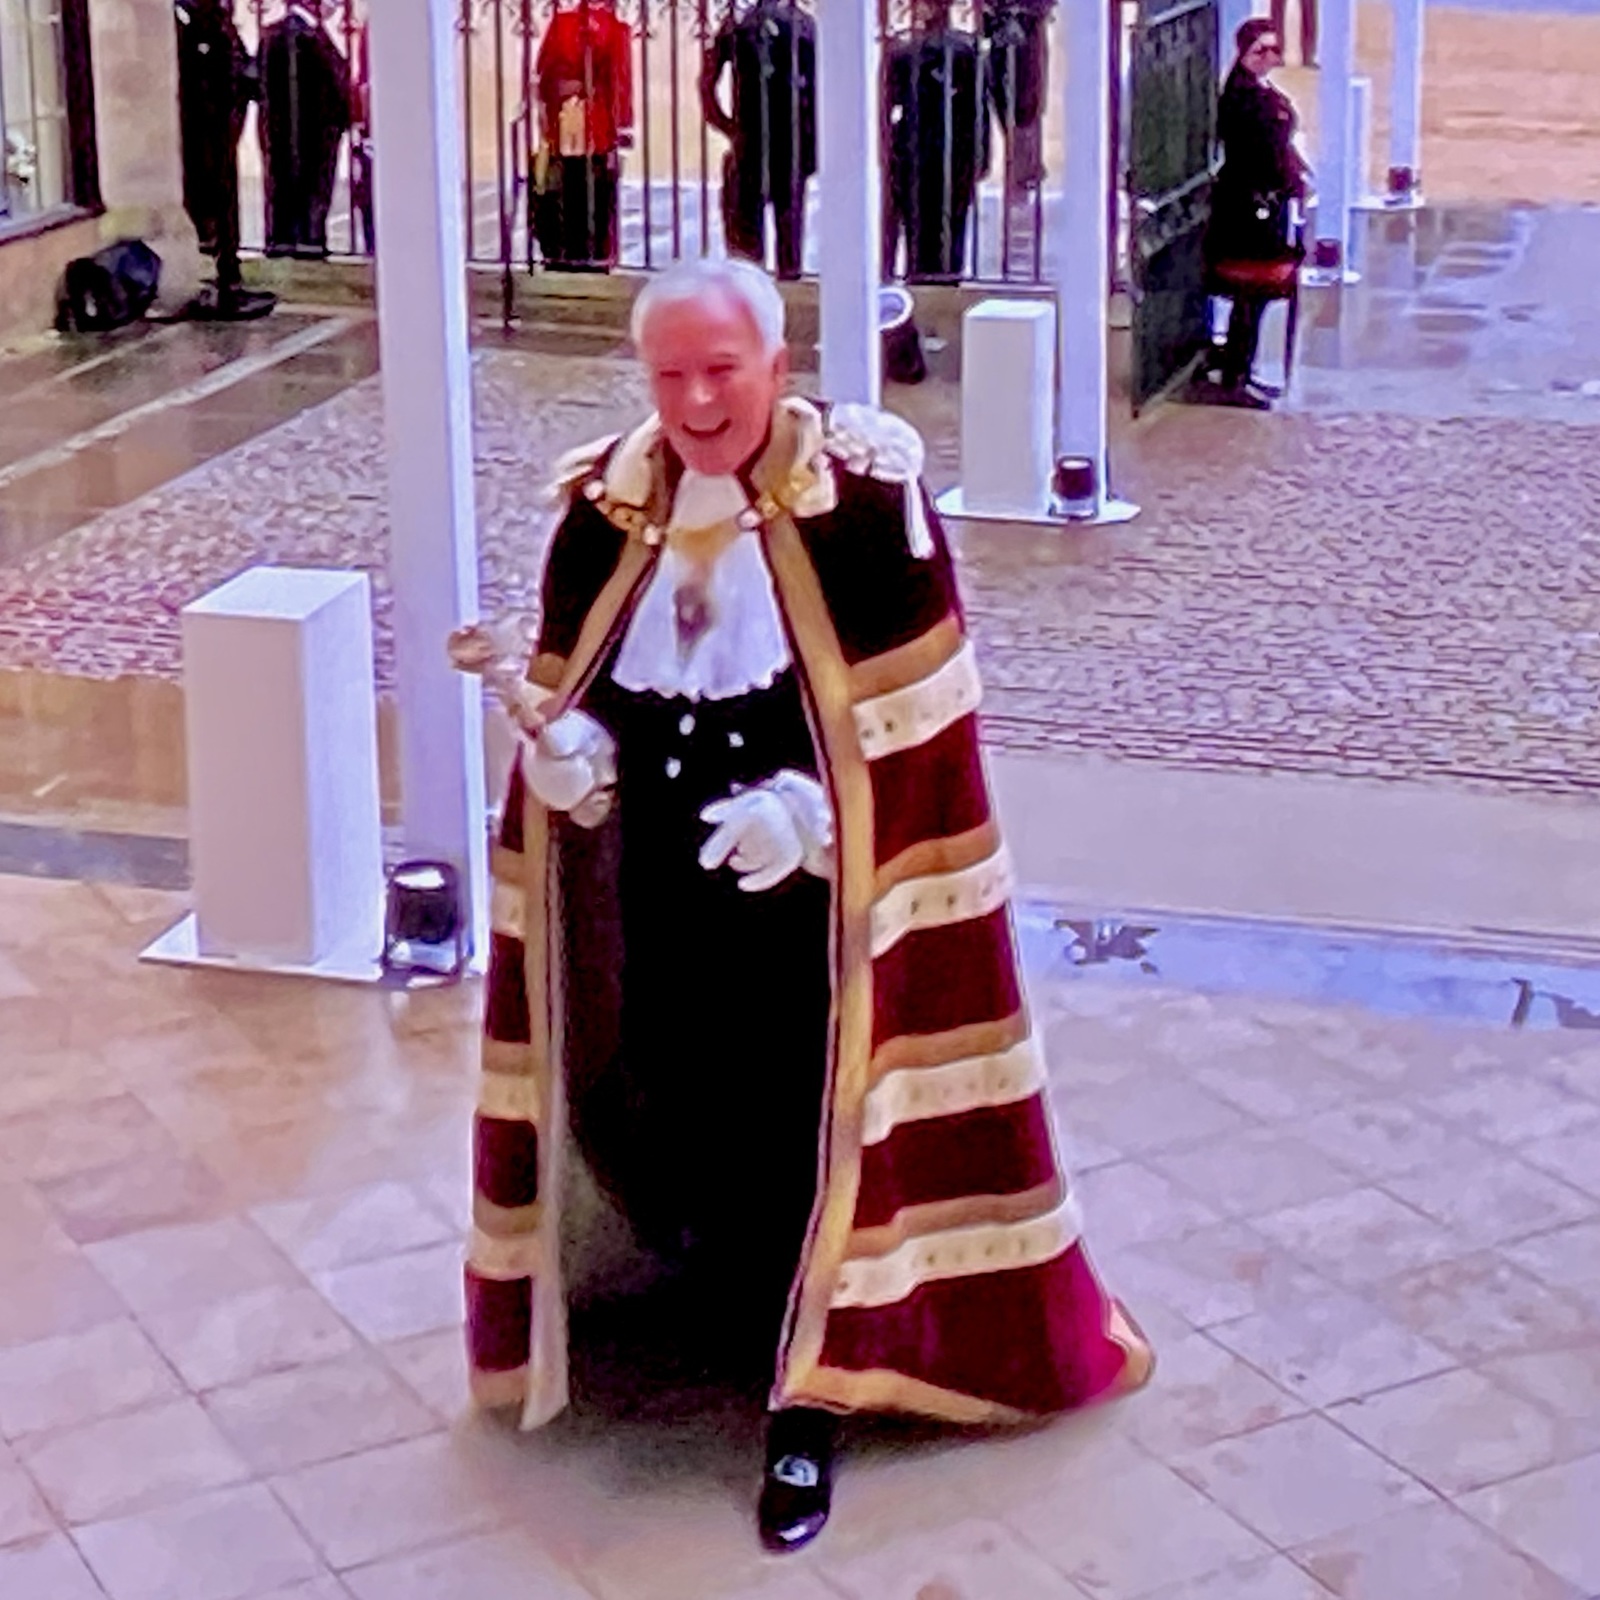 6 May 2023 - The City and the craft skills of The Livery had a real part to play in the Coronation. The Lord Mayor wore the Coronation Robe from the Skinners; and critically, the new Anointing Screen, gifted by the Livery and Corporation, shielded the King from public gaze at the most sacred moment in the Coronation